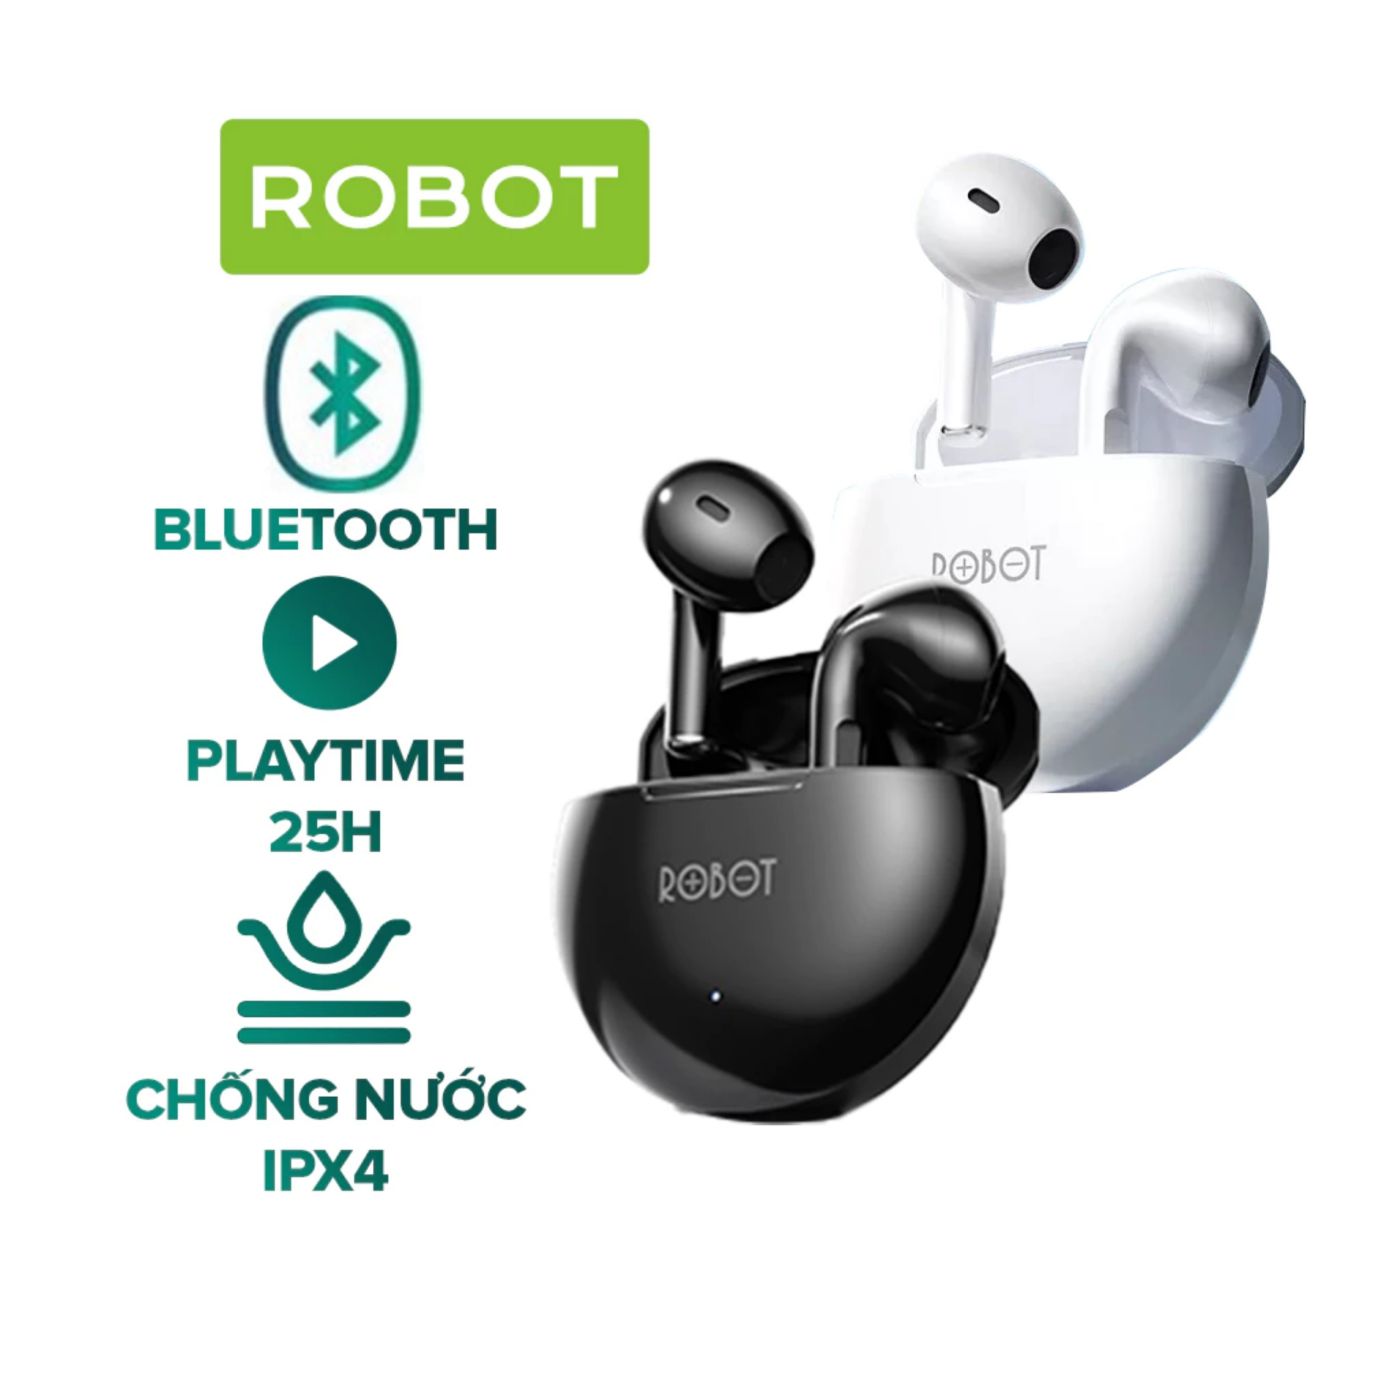 Tai Nghe TWS Bluetooth ROBOT Flybuds T10 Semi-in-ear, Playtime 25H, Chống Nước IPX4